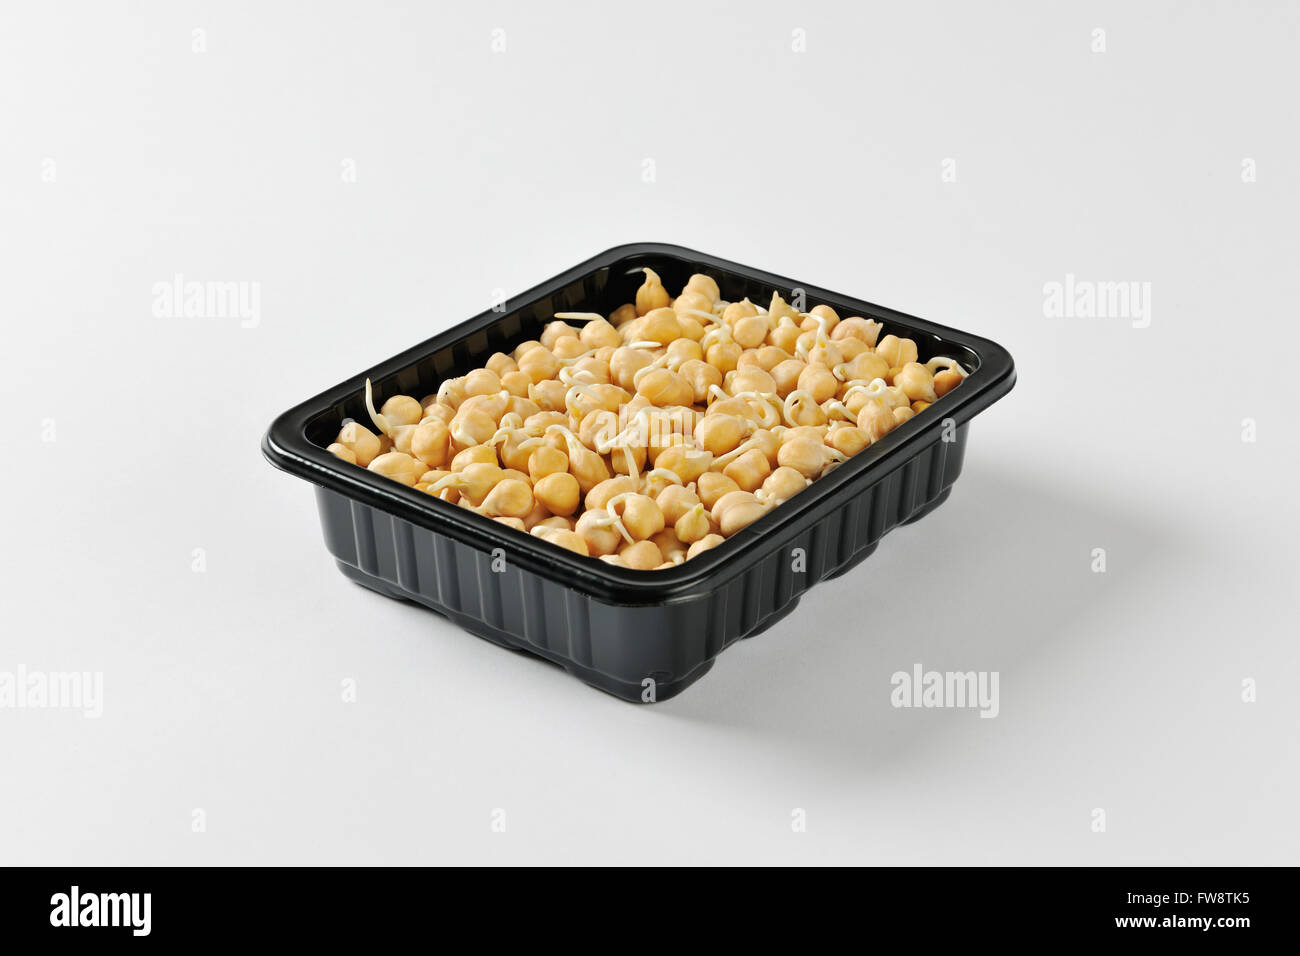 Sprouted chickpeas black plastic food container Stock Photo